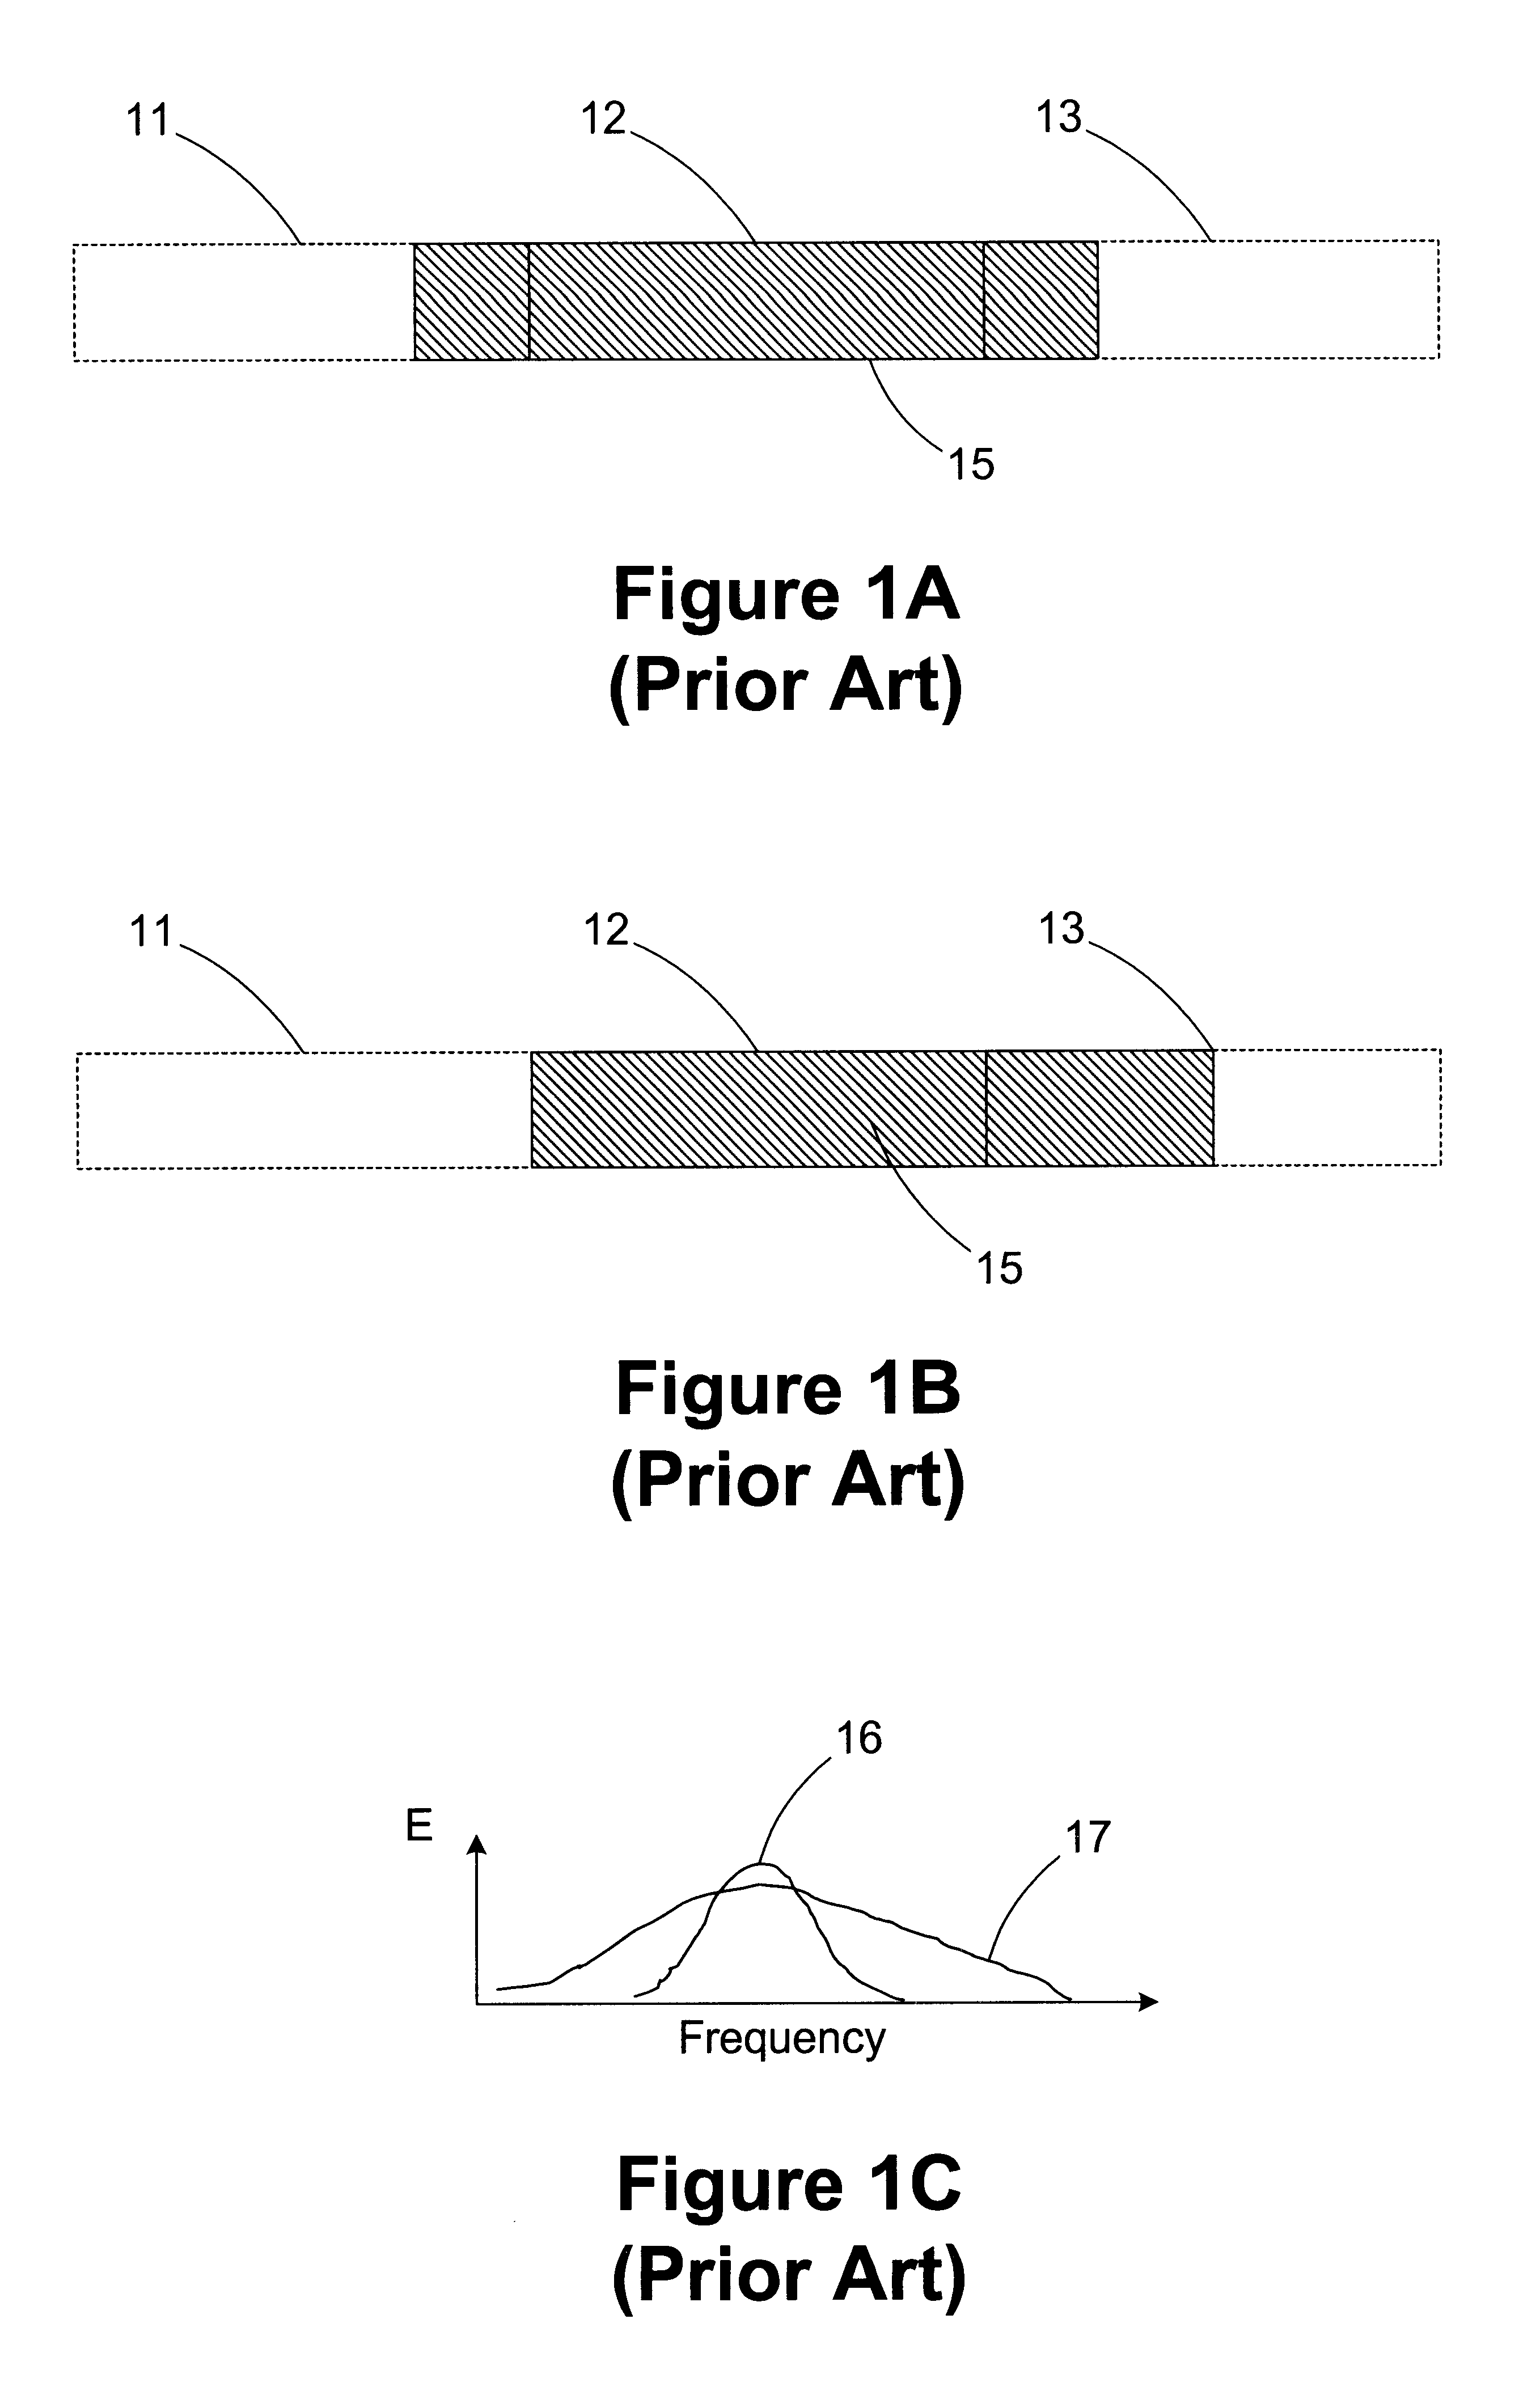 Signal detector with duration-based frame width